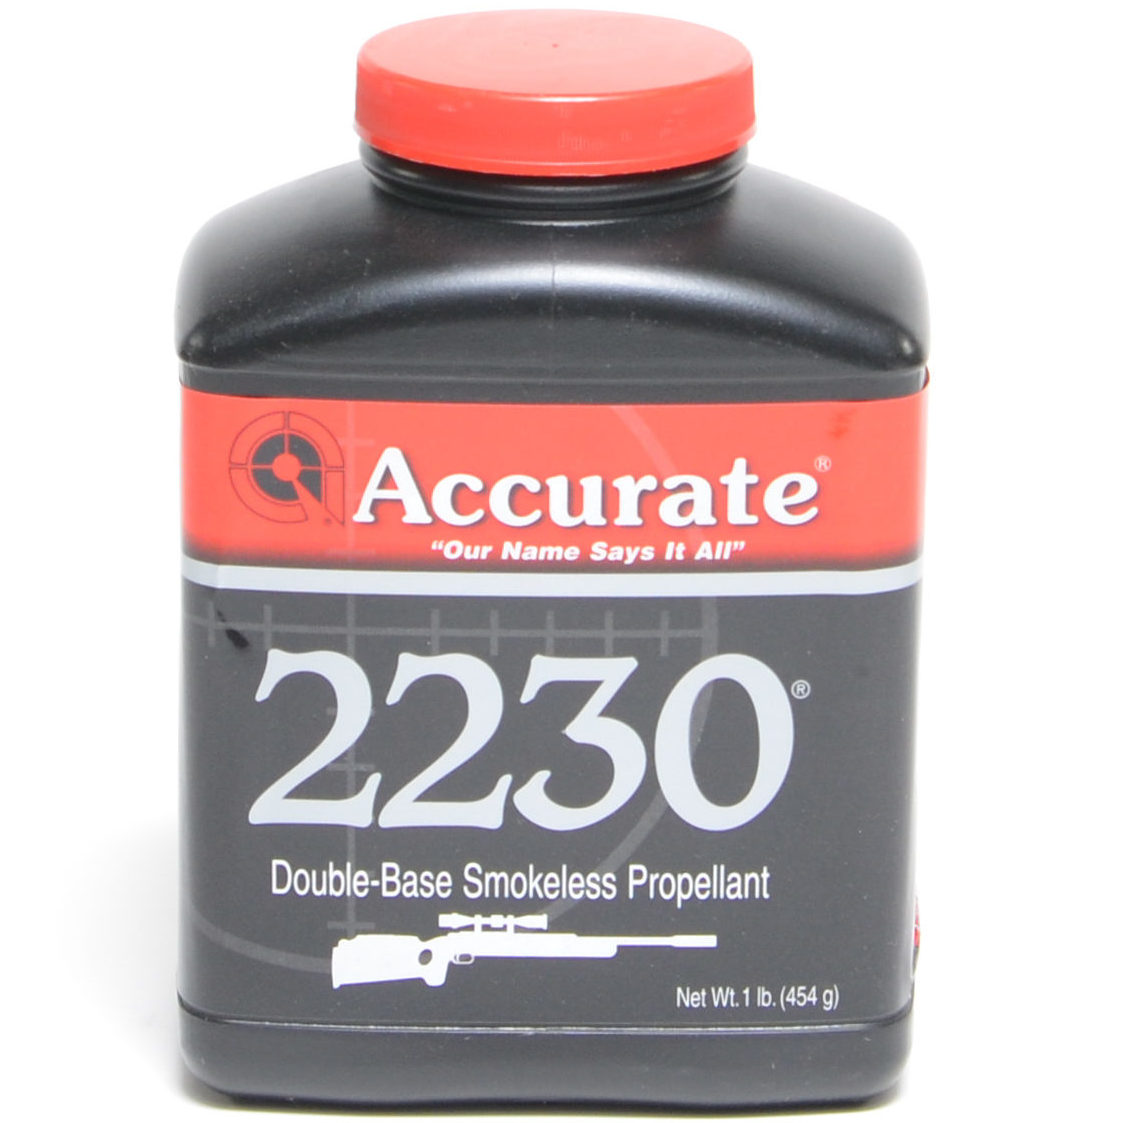 Accurate 2230 Propellant - Powder Valley